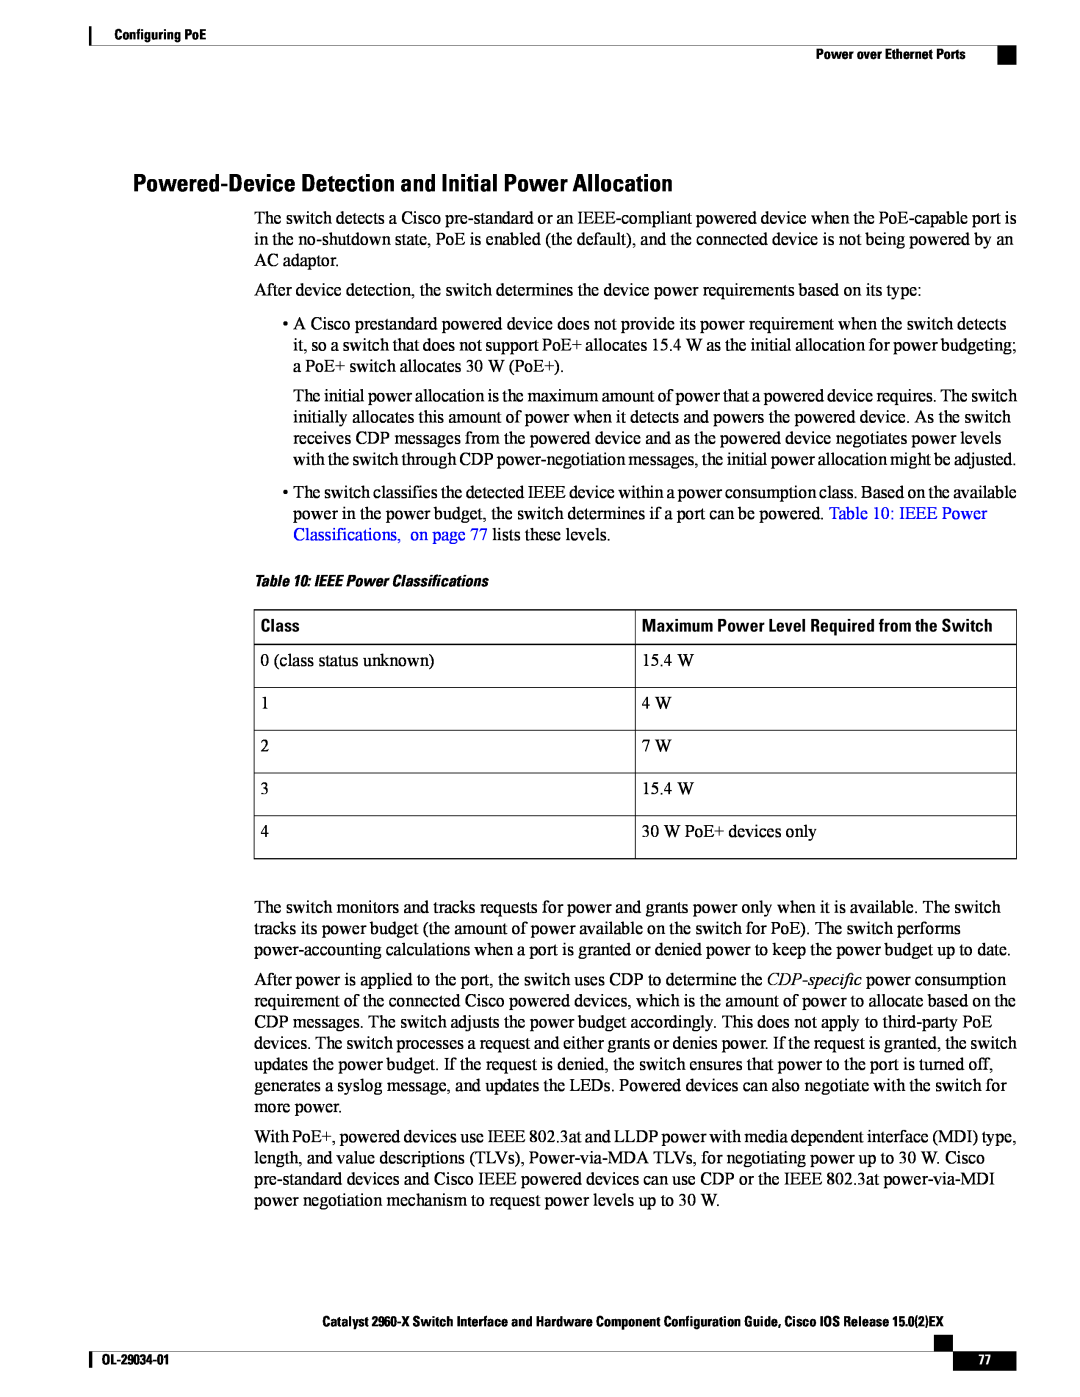 Cisco Systems WSC2960X48TDL manual Powered-Device Detection and Initial Power Allocation, Class 